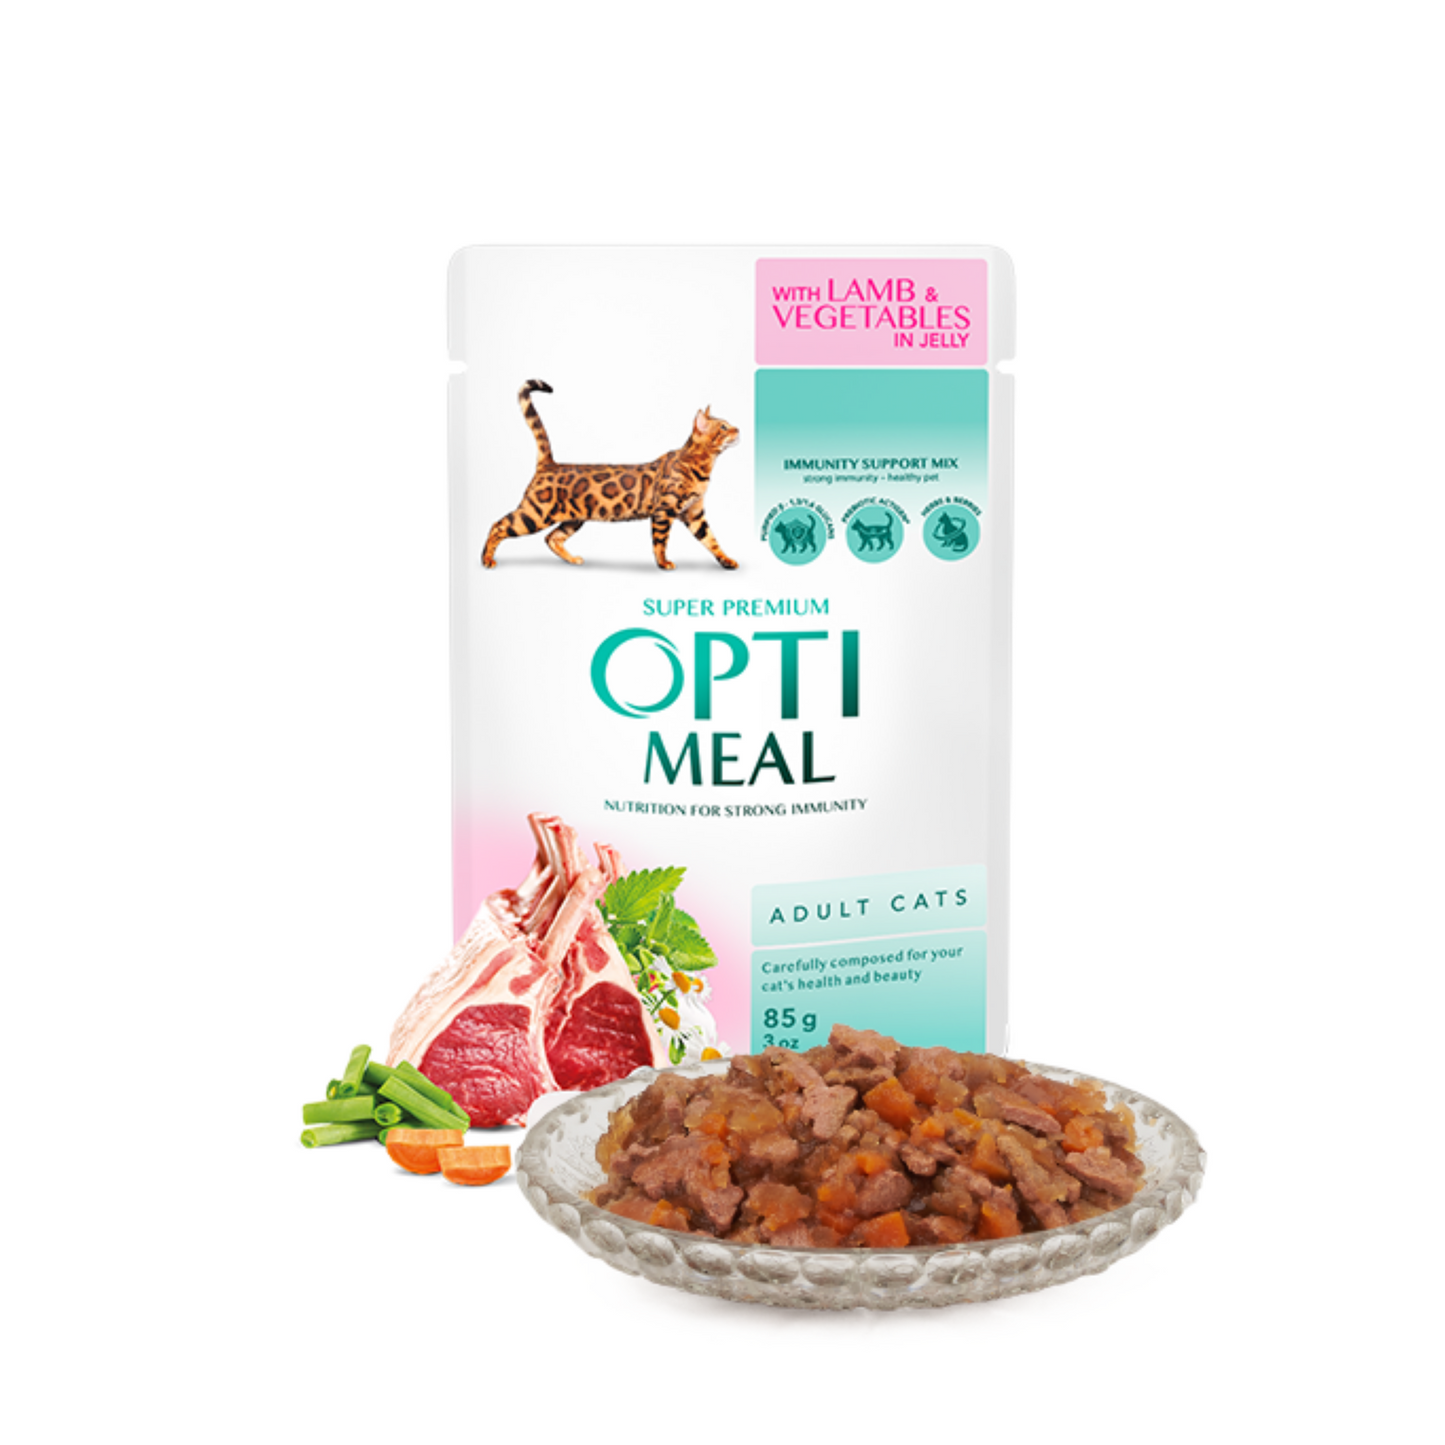 OPTIMEAL Pouches with Lamb & Veggies in Jelly